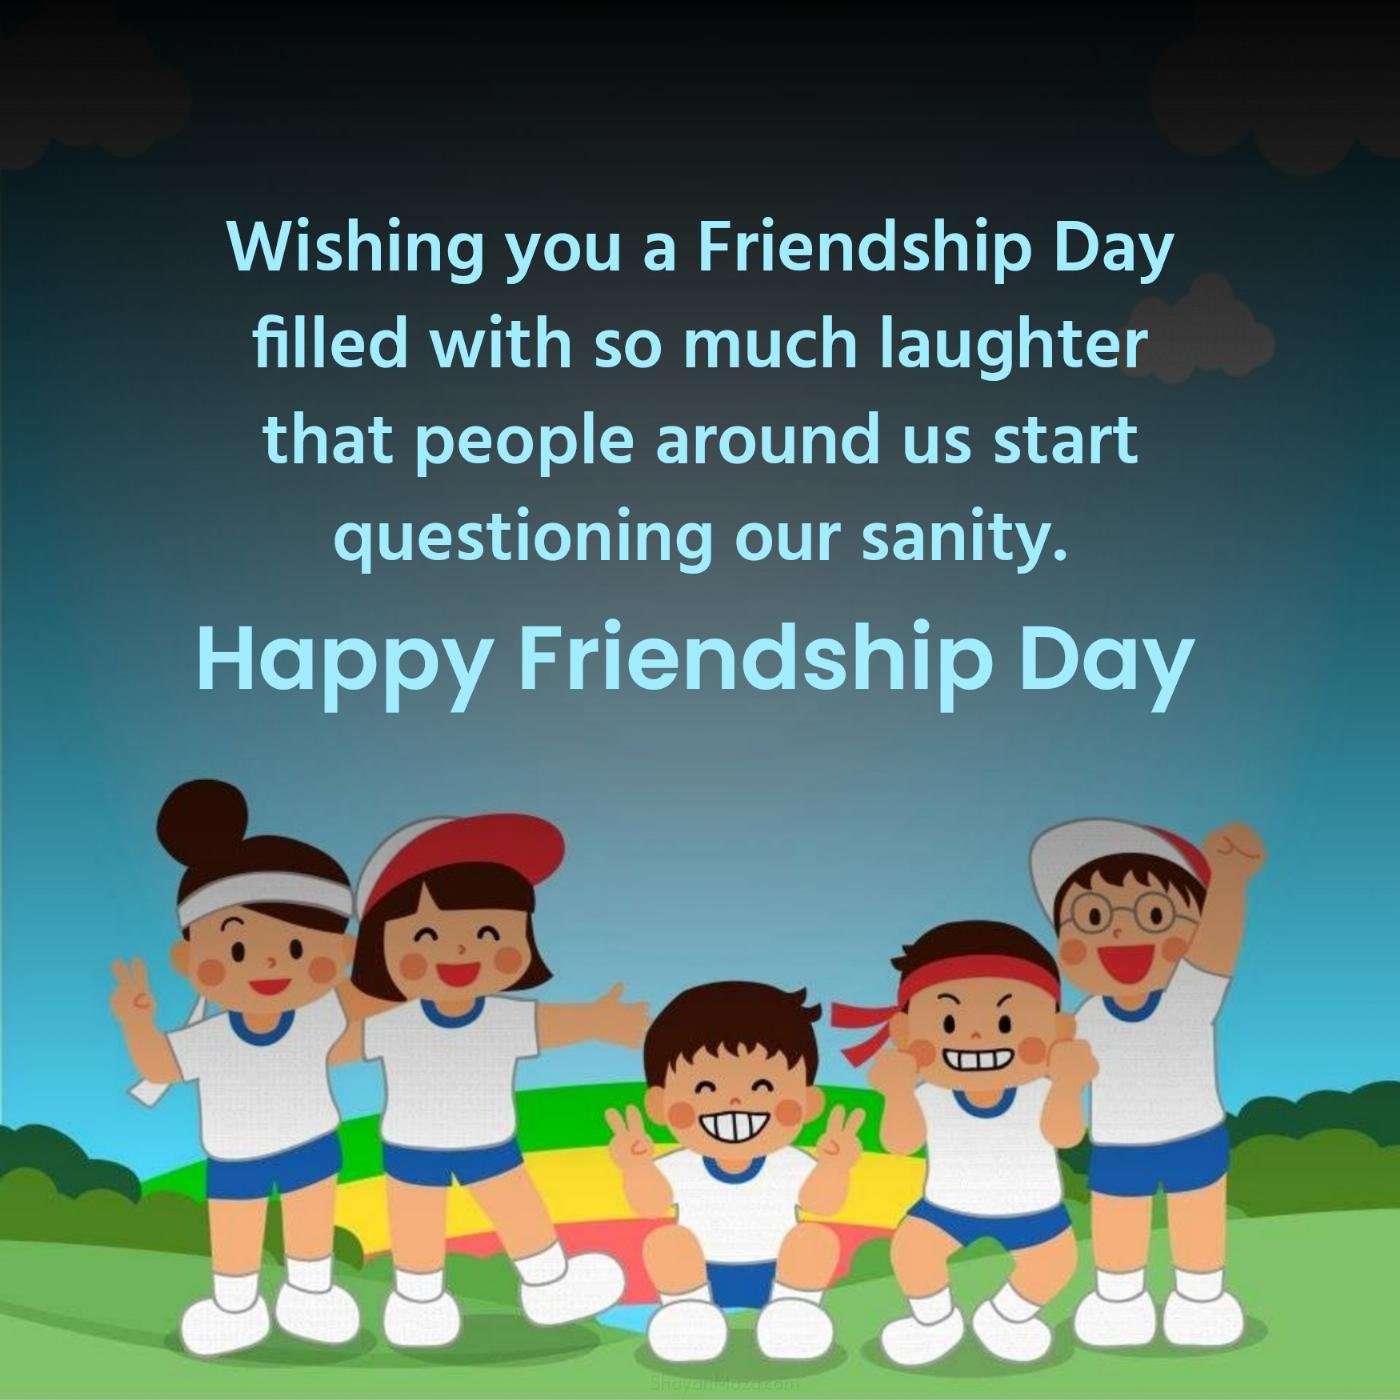 Wishing you a Friendship Day filled with so much laughter